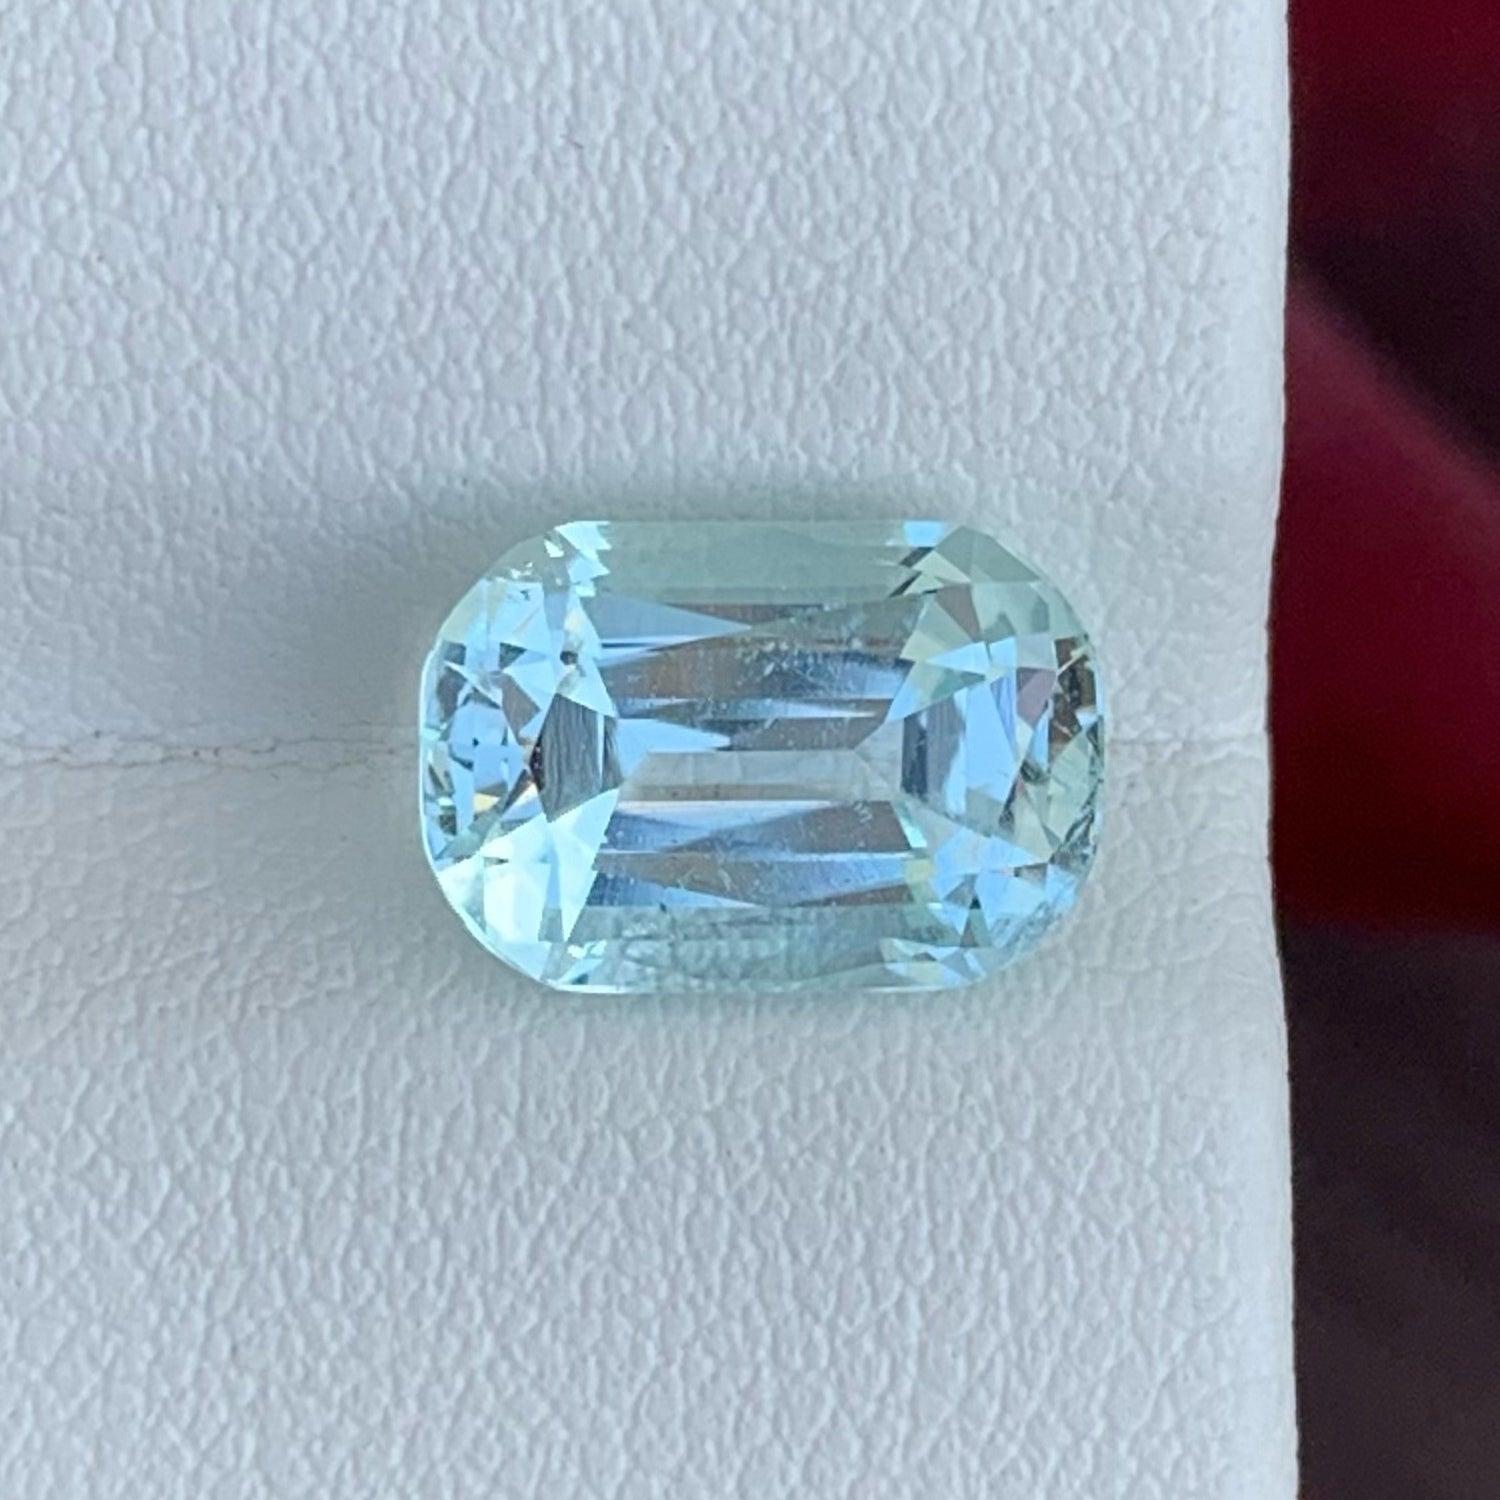 Lovely Sky Blue Aquamarine For Ring, available for sale at wholesale price natural high quality, 3.65 Carats, Vvs Clarity Loose Aquamarine from Pakistan.

Product Information:
GEMSTONE NAME: Lovely Sky Blue Aquamarine For Ring
WEIGHT: 3.65